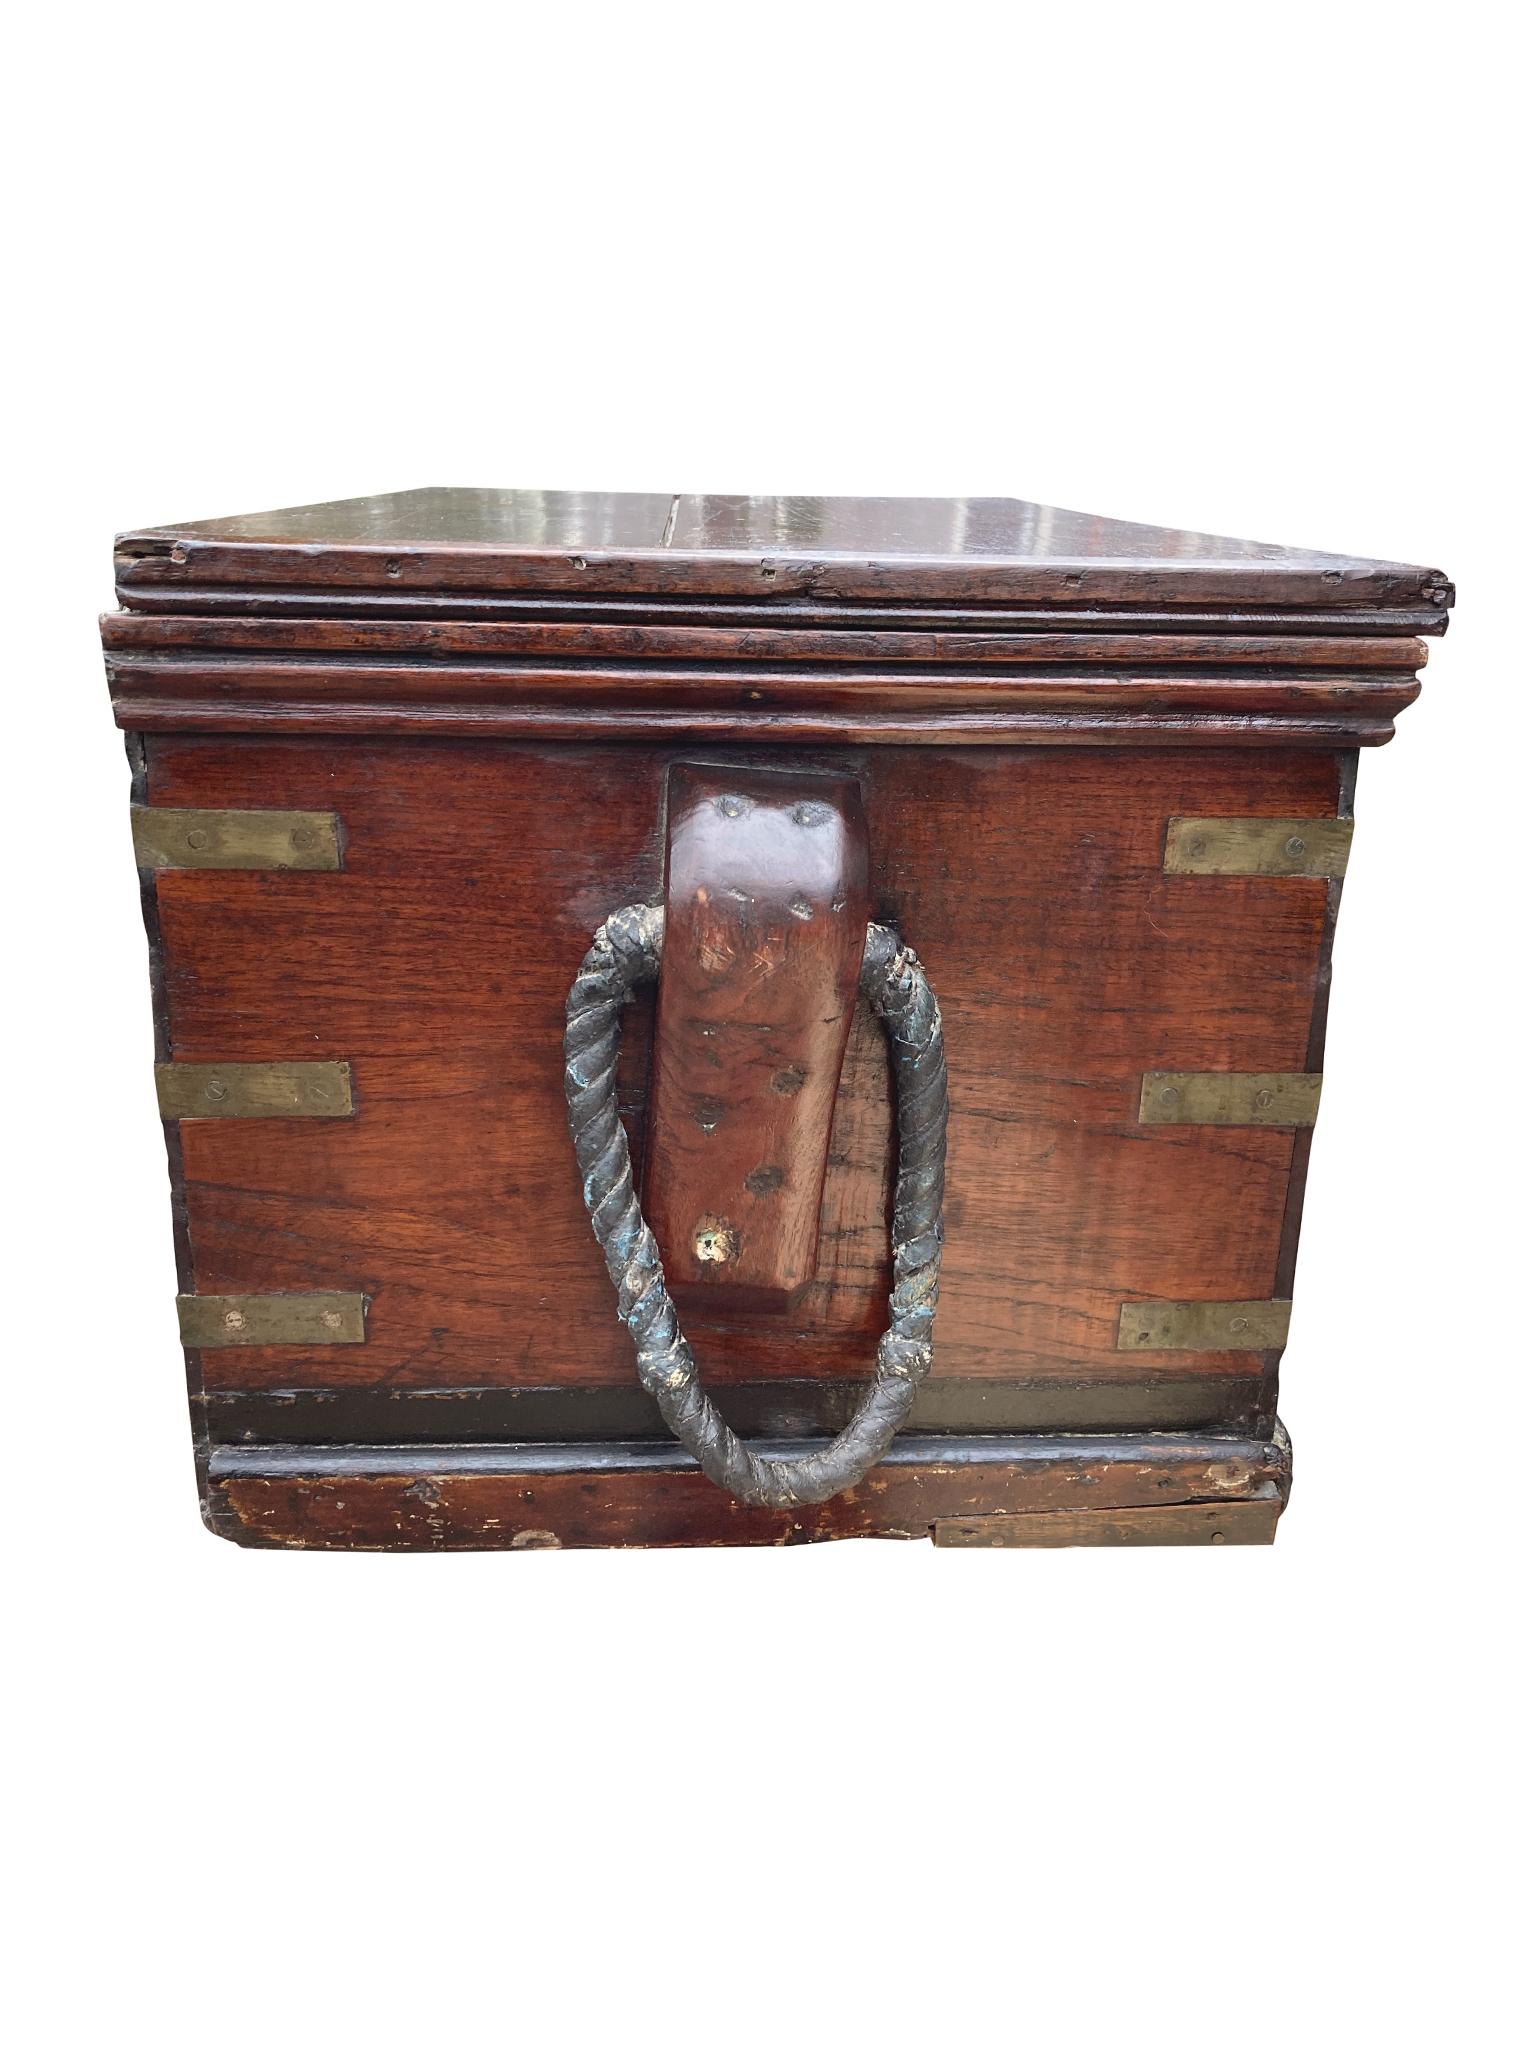 Hand-Crafted 19th Century New England Seaman's Chest